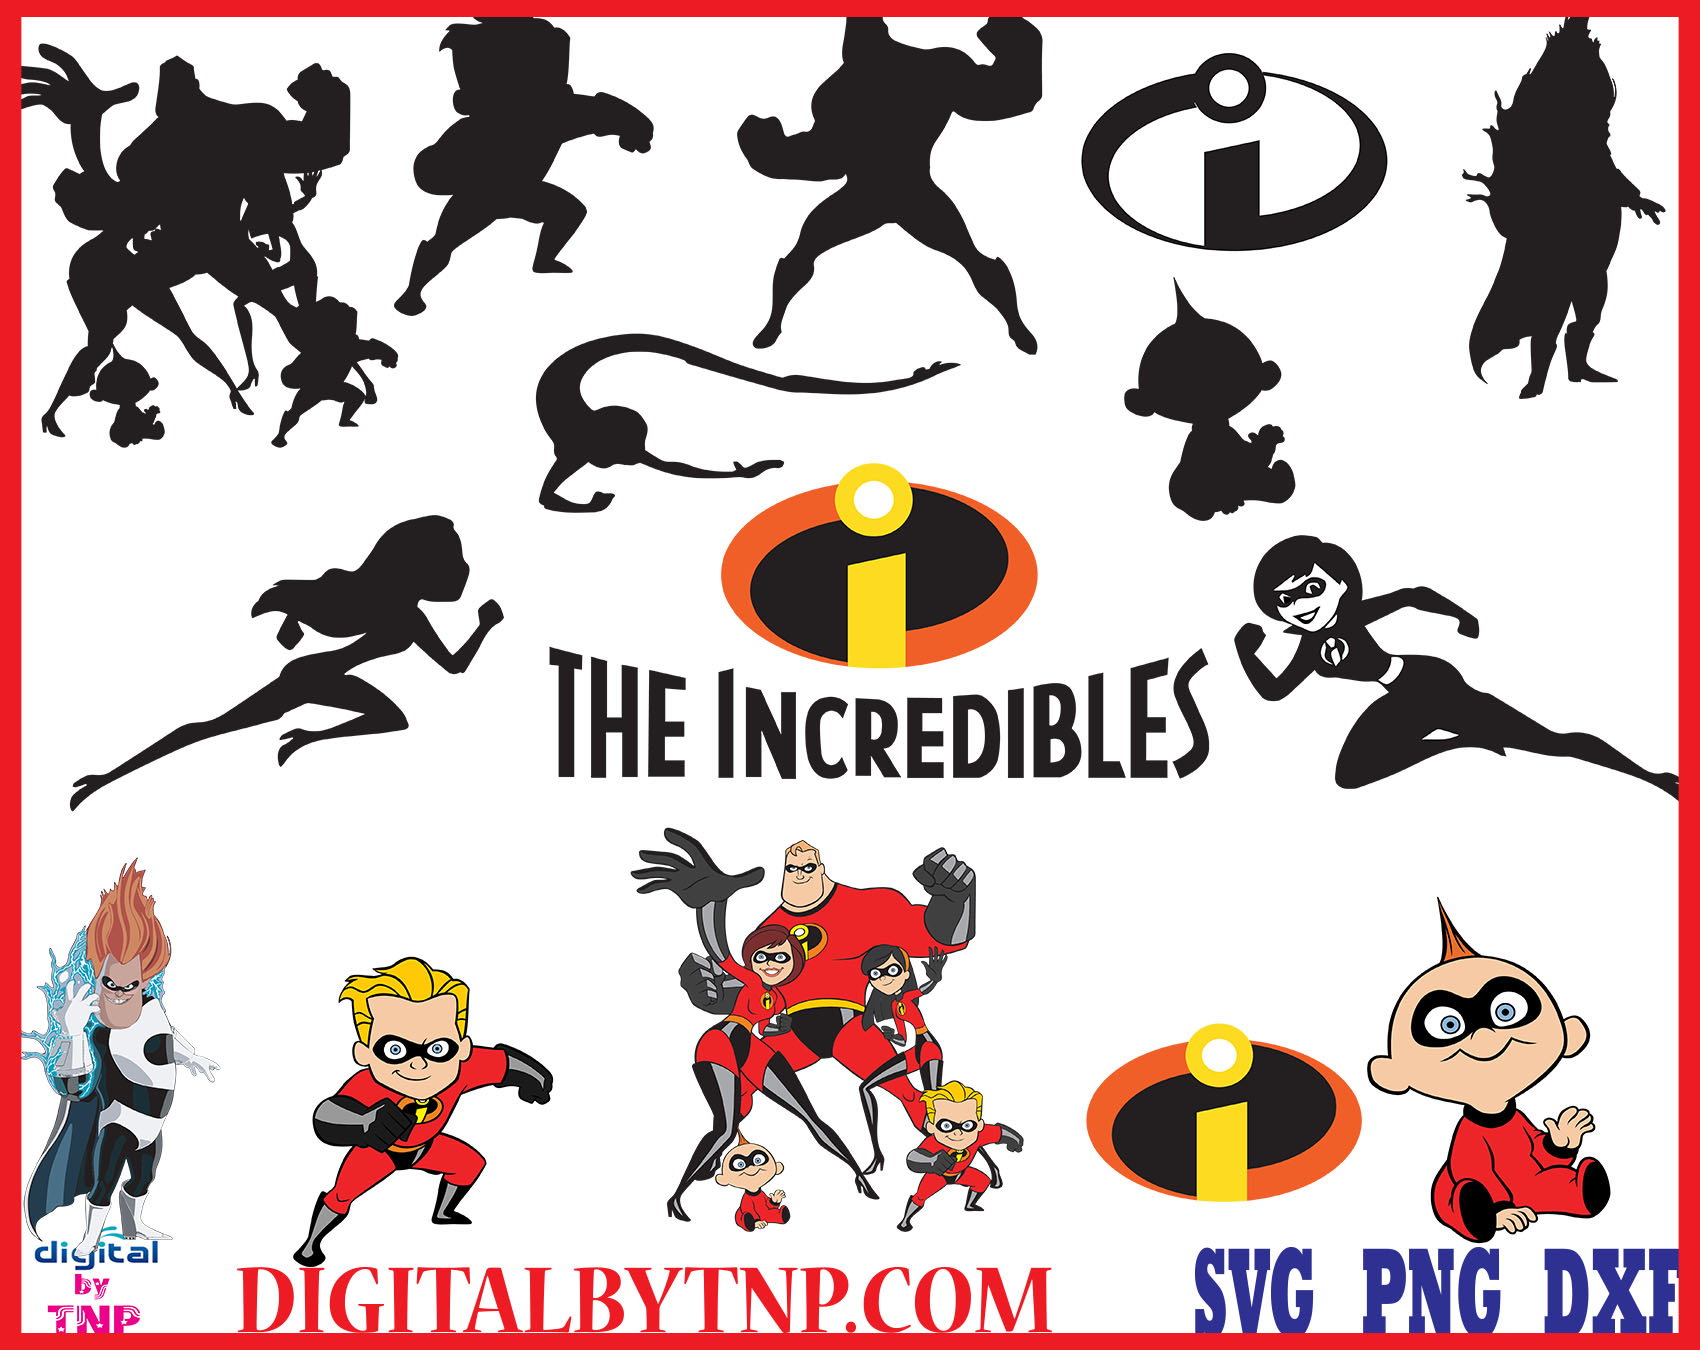 Download A Sale Minions Svg Disney Svg Disney Bundle Svg Minions Cut File Minions Clip Art Minions Vector Minions Layered Despicable Me Svg Files For Silhouette Cameo Cricut Customer Satisfaction Is Our SVG Cut Files